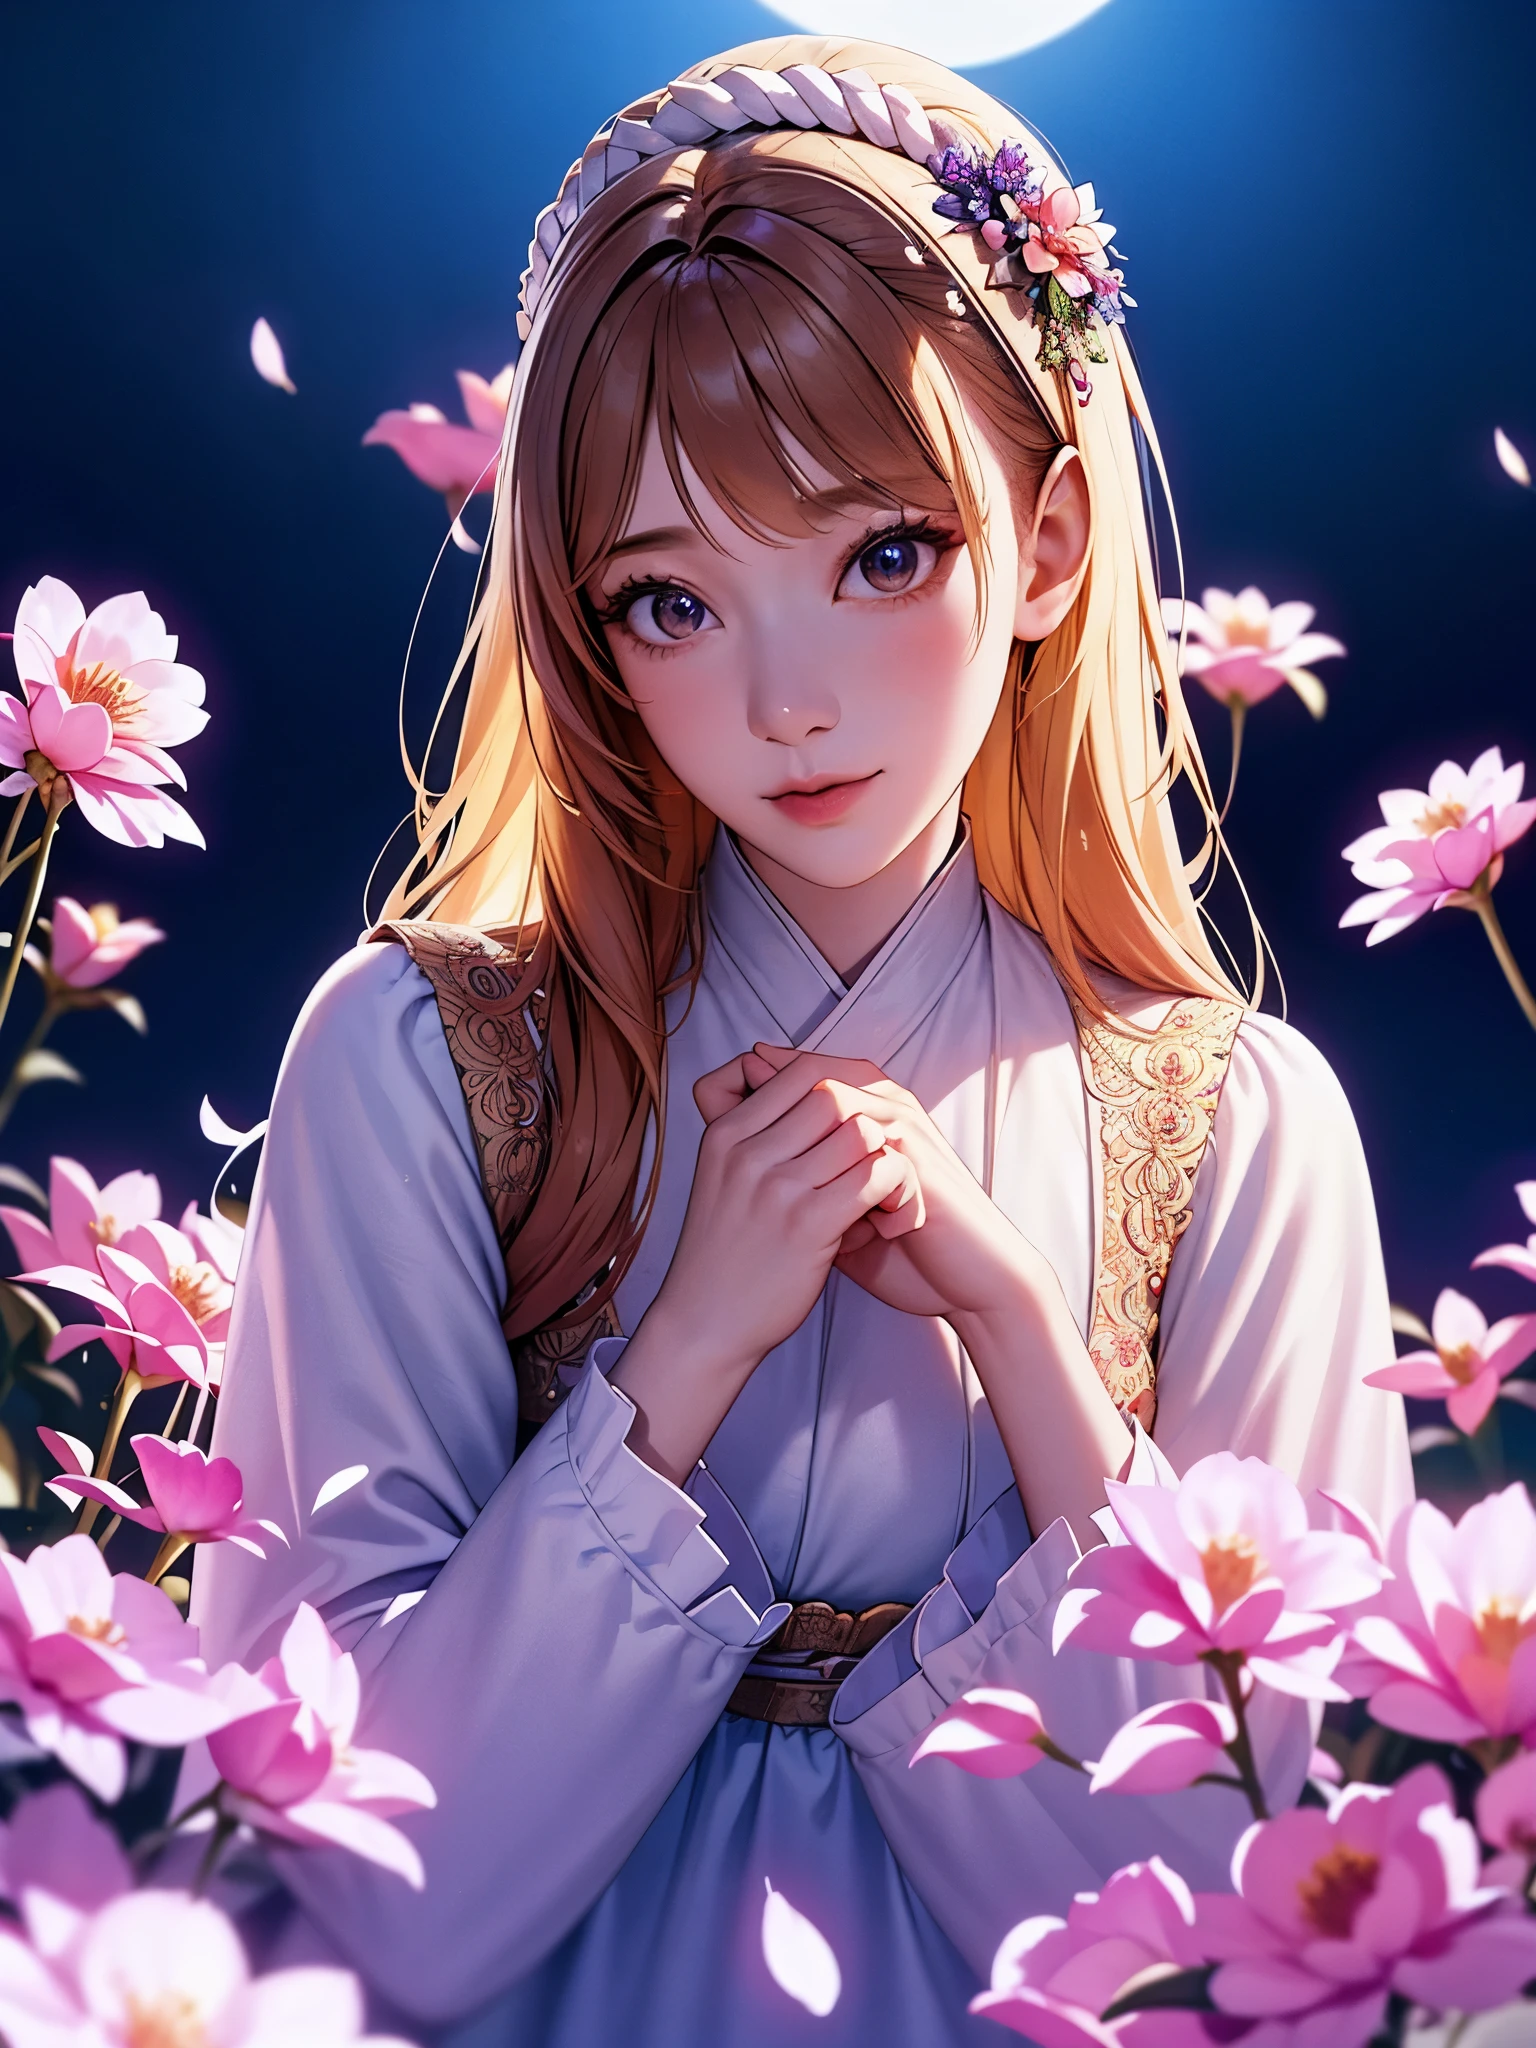 beautiful girl in the garden, Wearing a hanbok, vivid flowers々surrounded by. the moon shines brightly in the night sky, Cast a soft light on the scene. Images are of the highest quality, in high resolution, clear details, and incredibly detailed backgrounds. The girl&#39;s hanbok appearance is exquisitely drawn., Displaying intricate patterns and flowing fabrics. The garden is like々It&#39;s full of flowers, Each petal and leaf is meticulously rendered.. Moonlight illuminates the entire landscape, create a dreamy atmosphere. There is a feeling of (Idol@star:1) style, Add a unique, artistic feel to your images. The colors are rich and vivid, Increase overall visual impact. The lighting is nice and there is a nice atmosphere., Create a tranquil and enchanting atmosphere.
